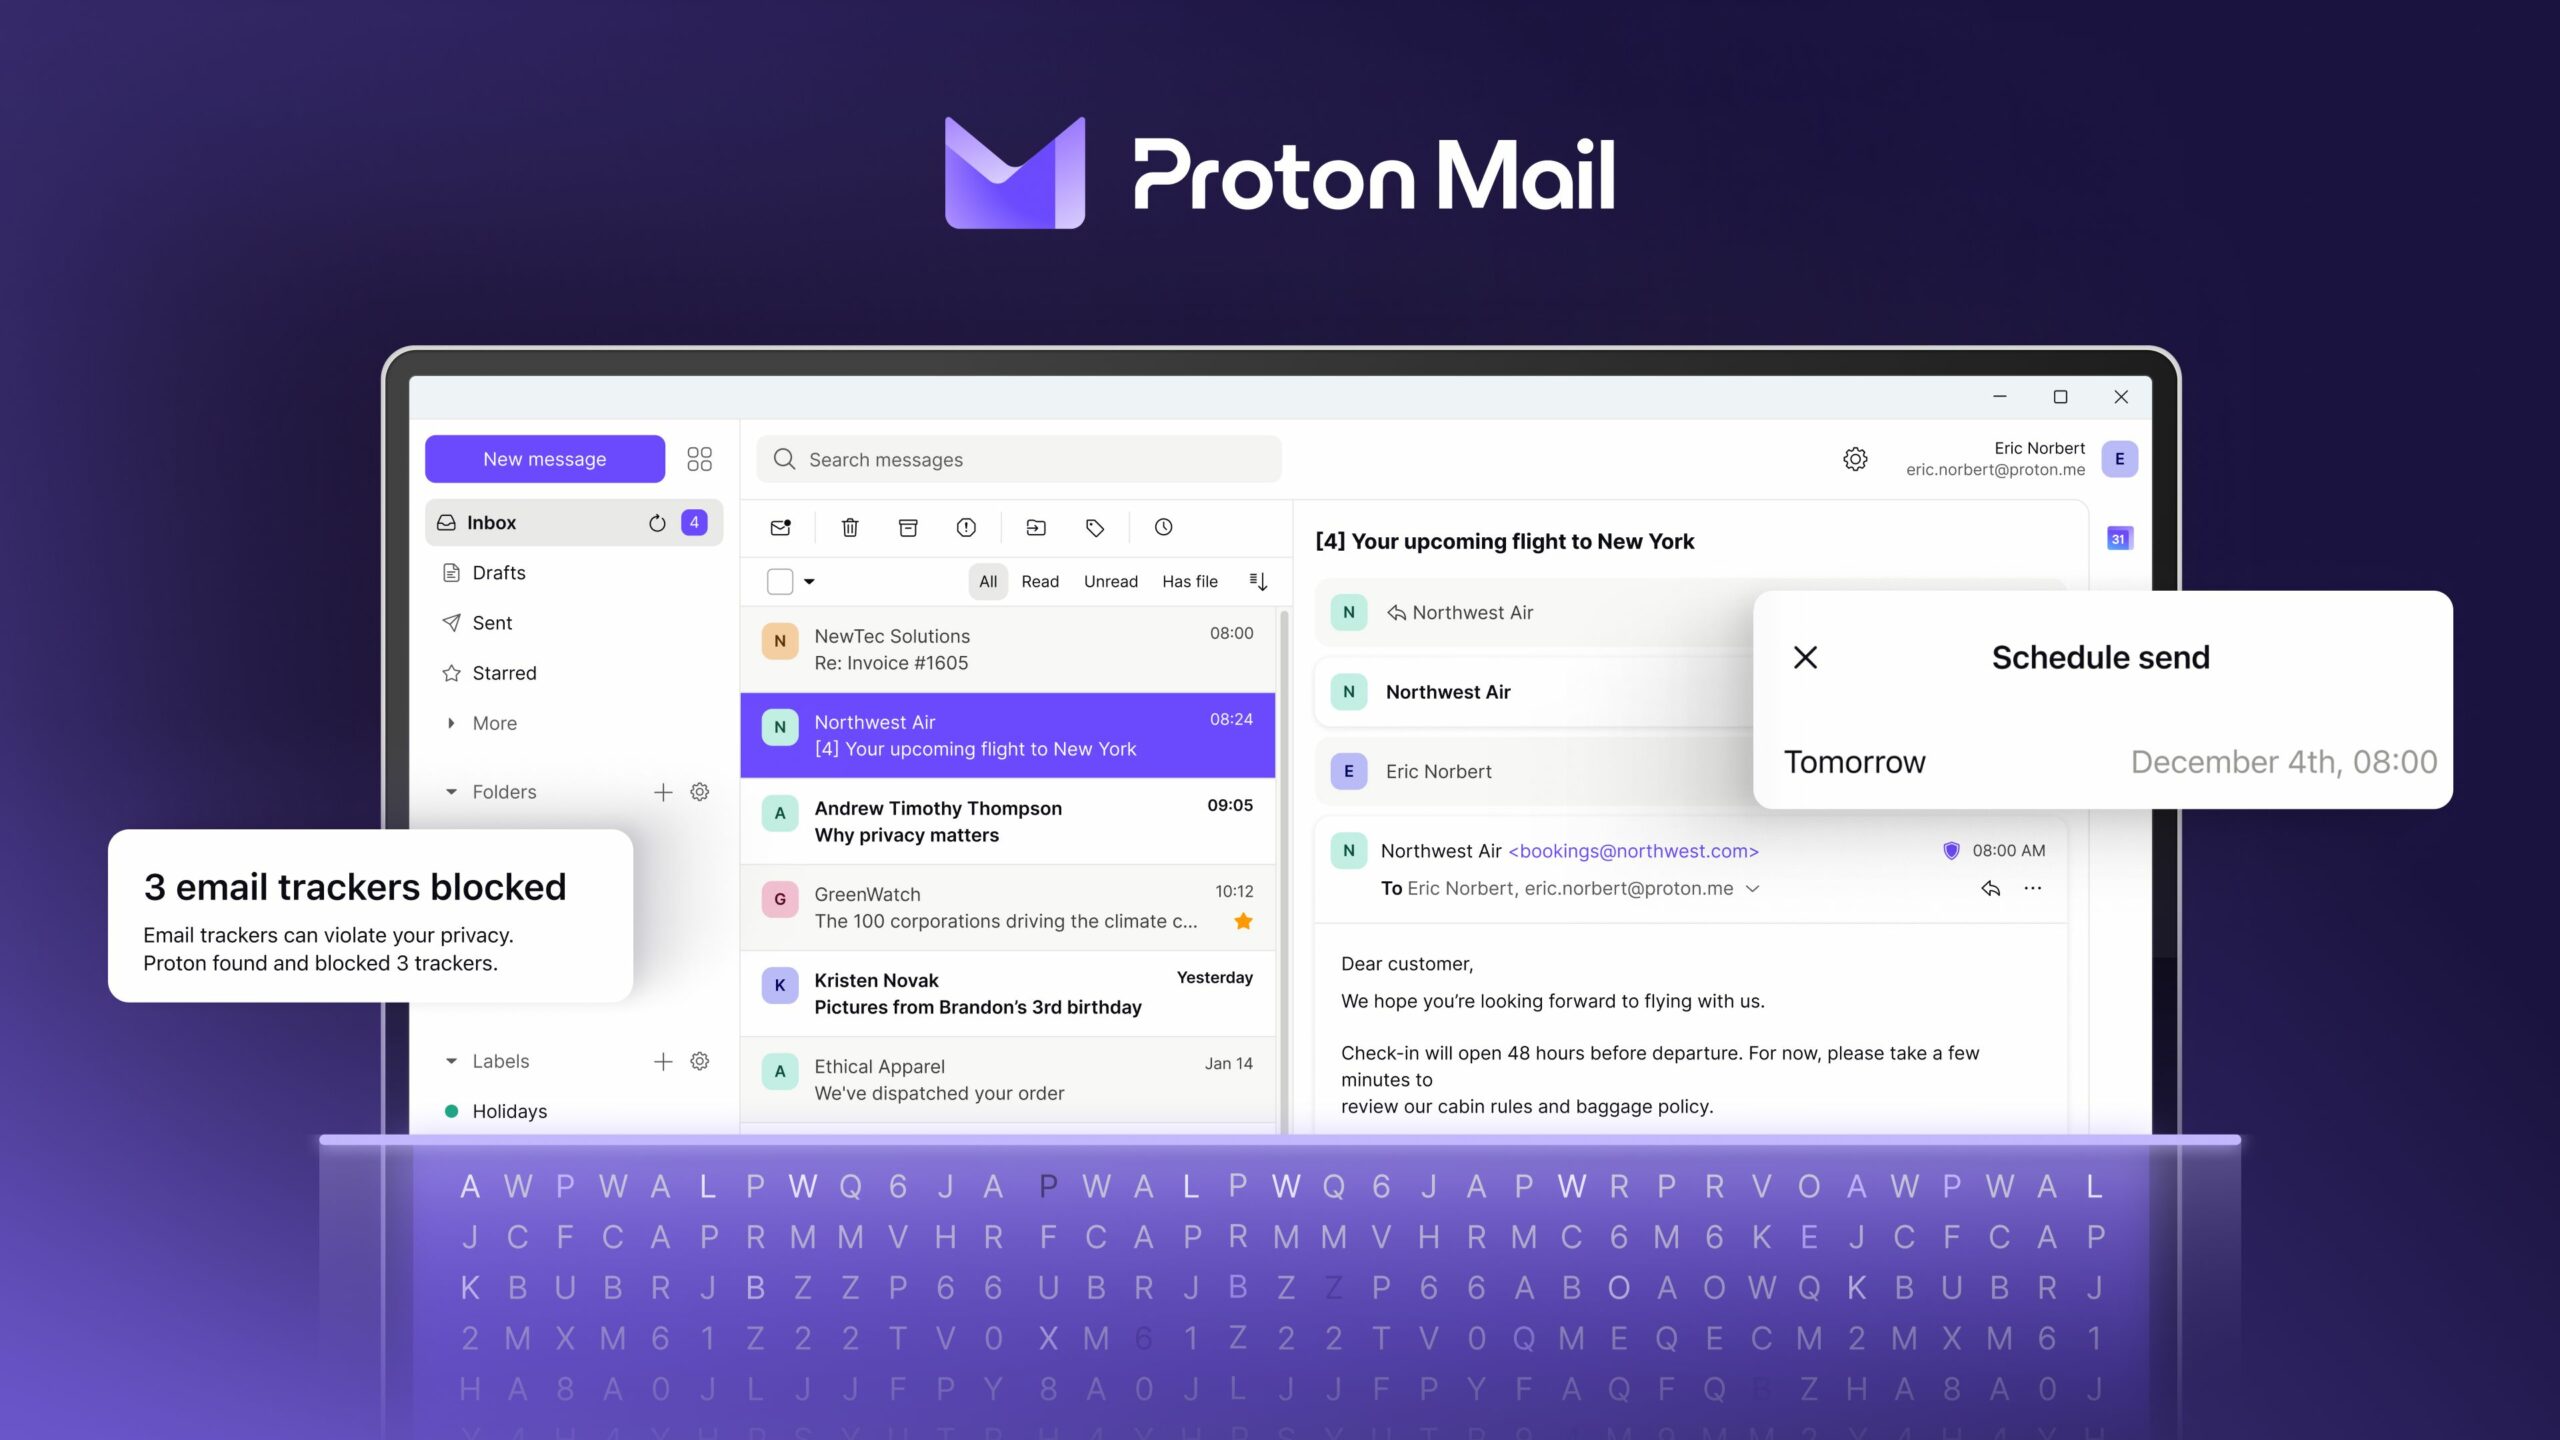 Proton Mail now has one more advantage over Gmail on desktop